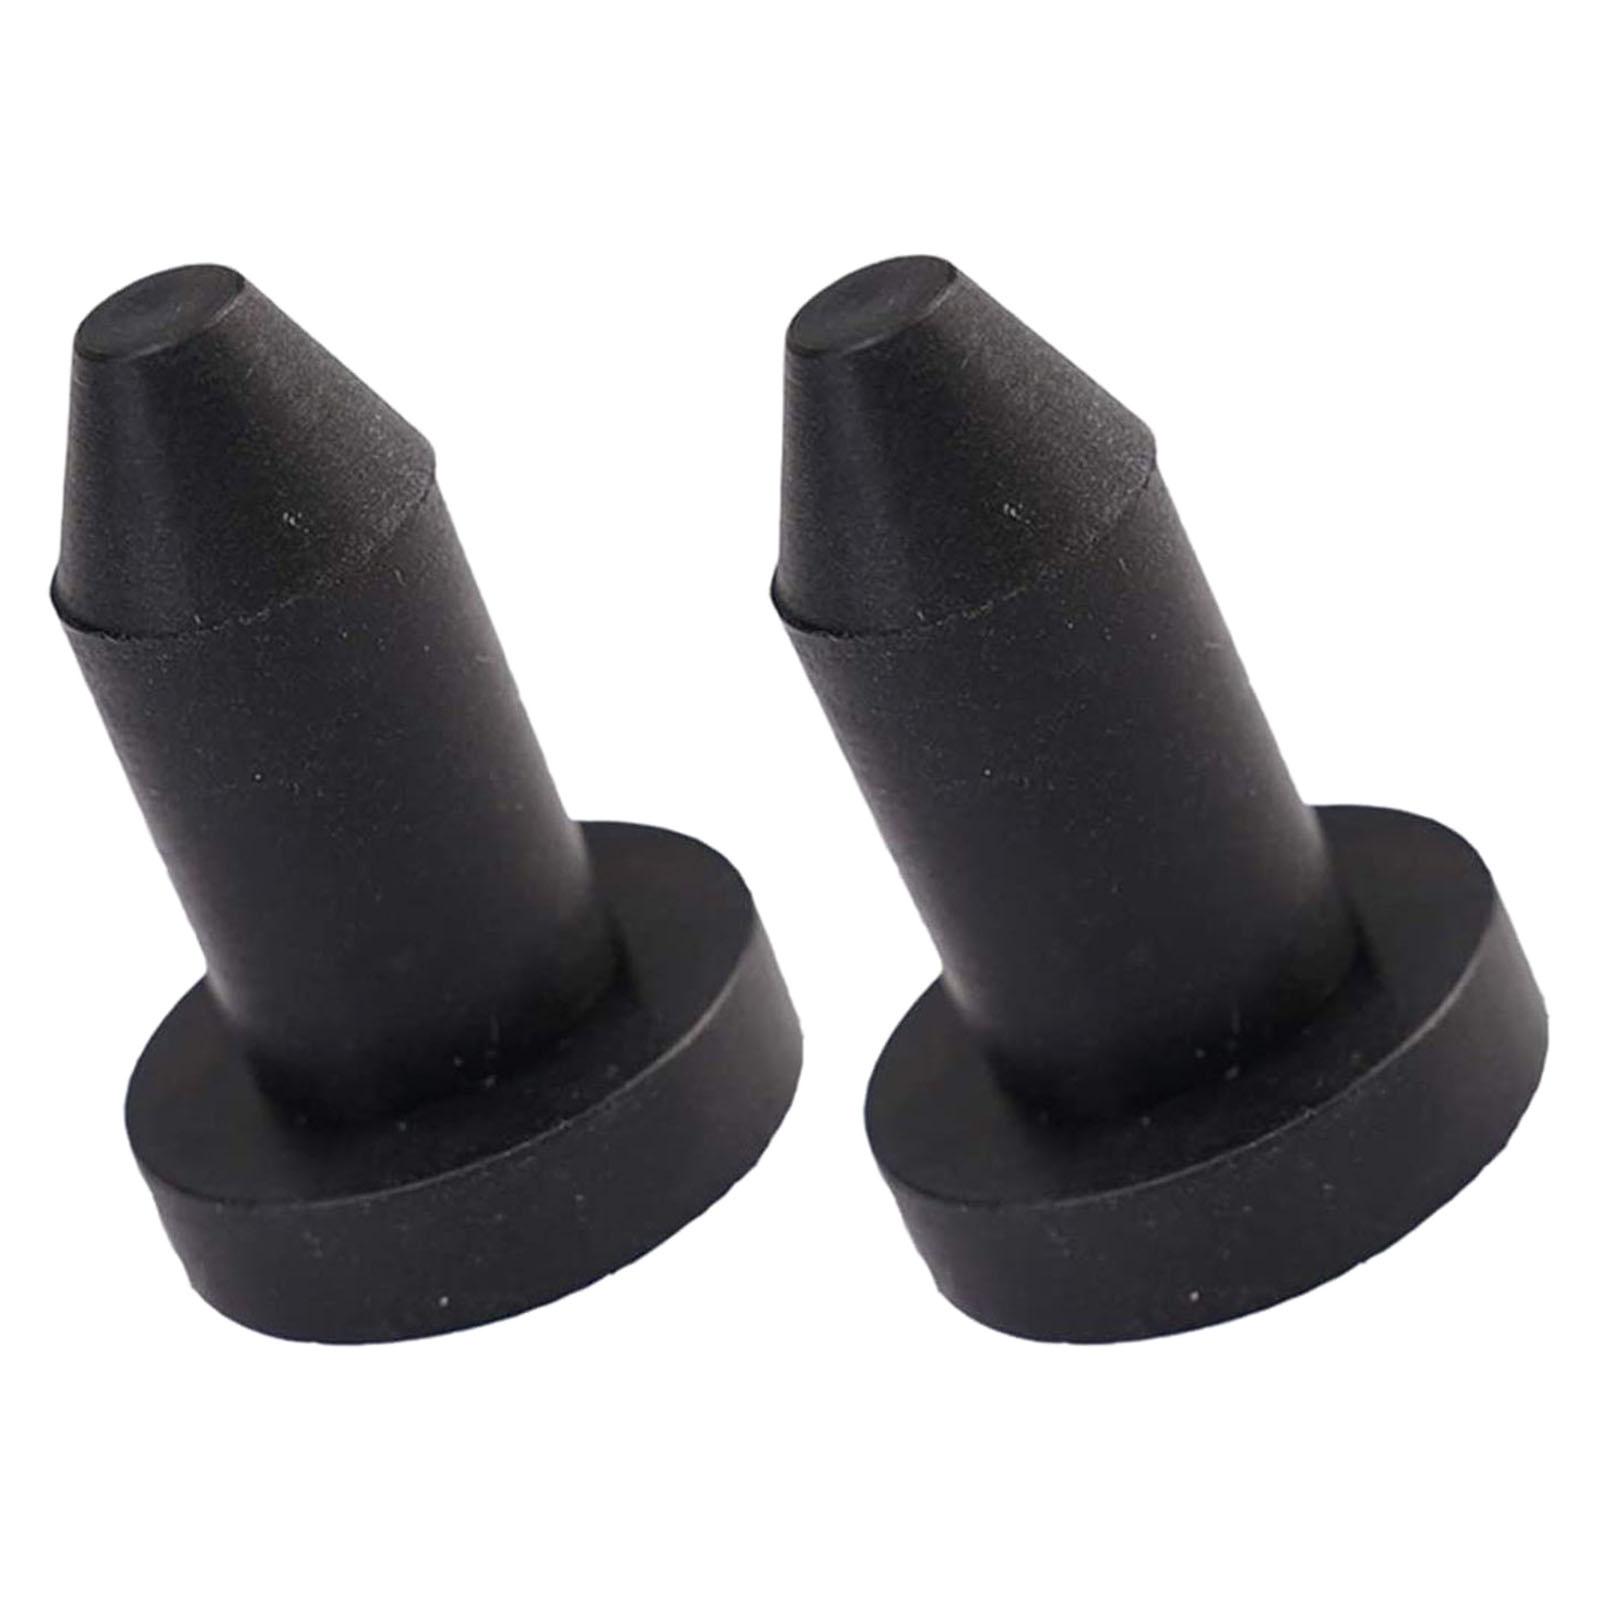 2pcs Kayak Drain Plugs Stoppers for Excurion 10 Pedal Boats Replacement